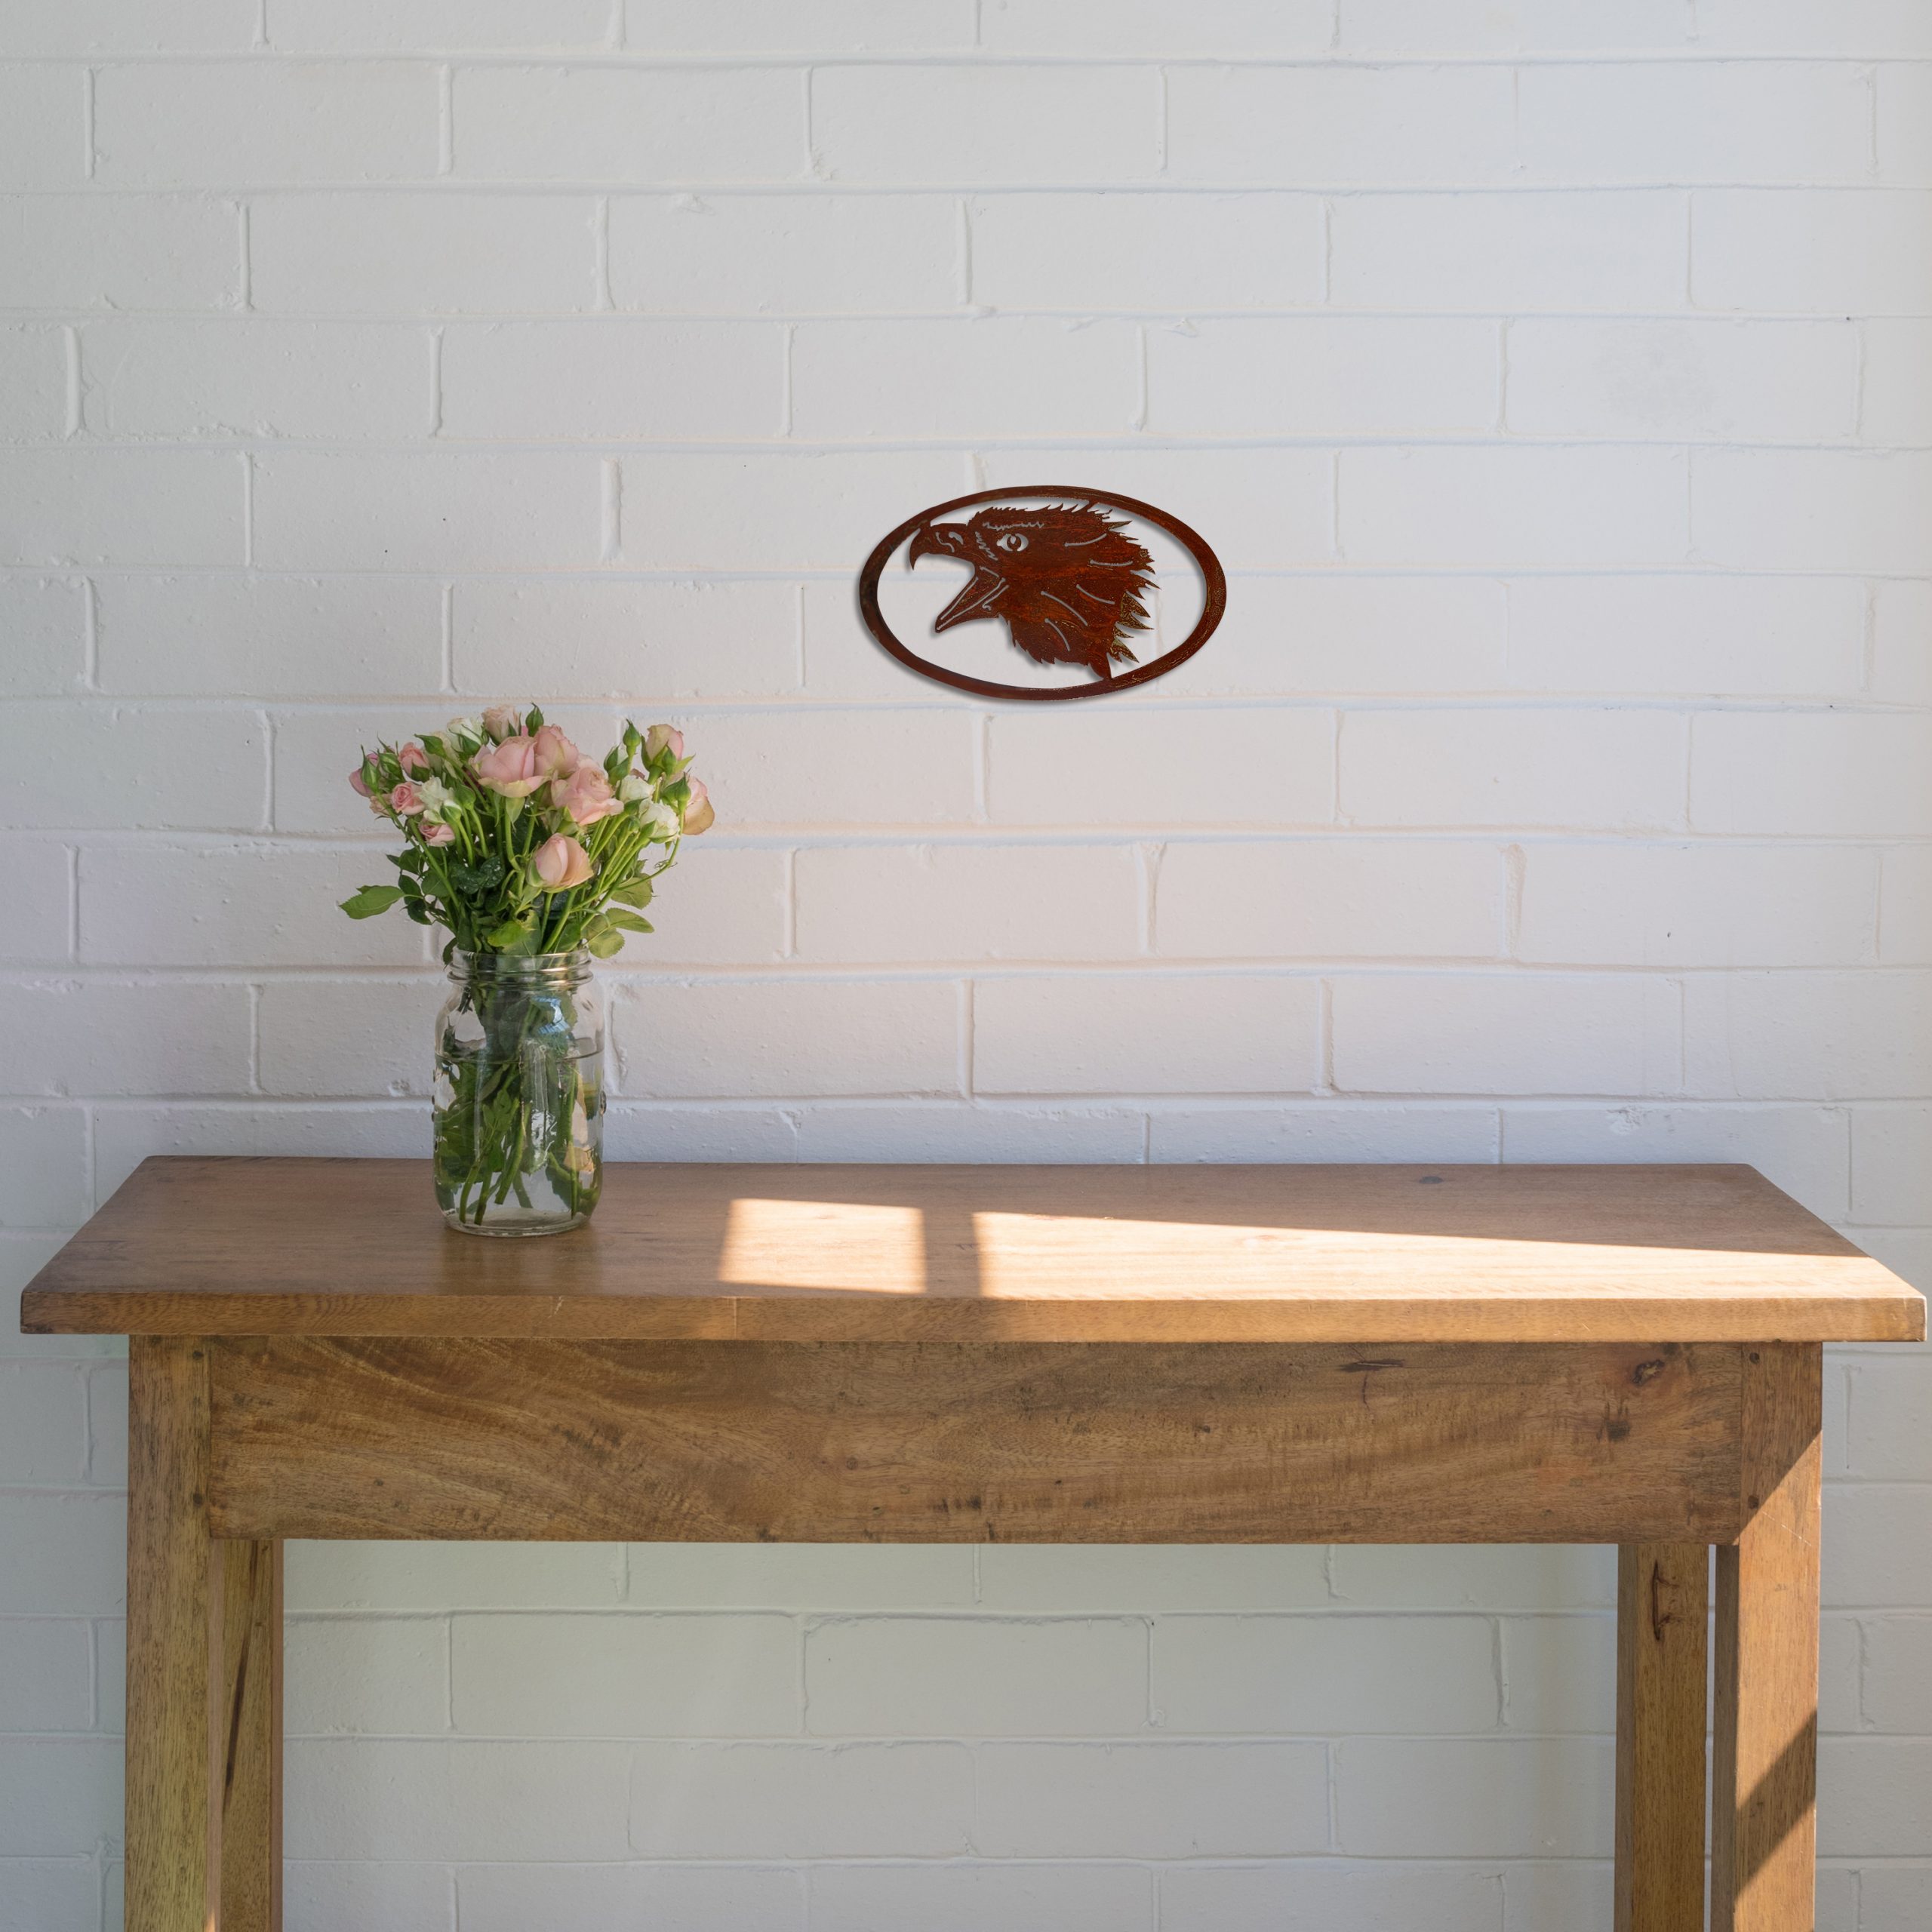 rust-eagle-head-oval-over-table-scaled